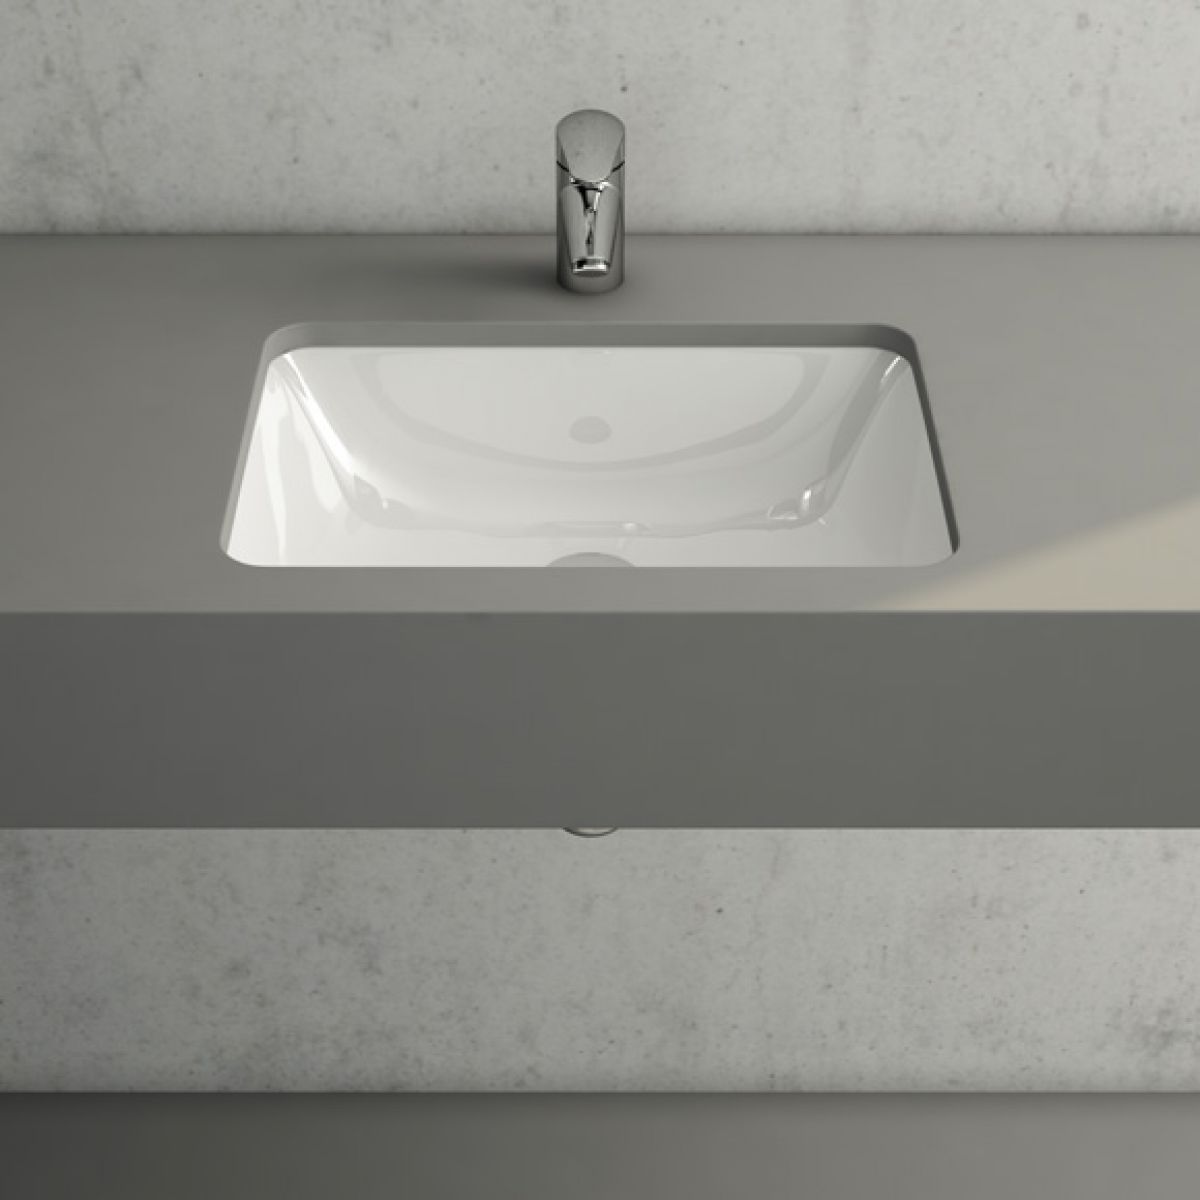 M-Line under counter Inset basin by VitrA